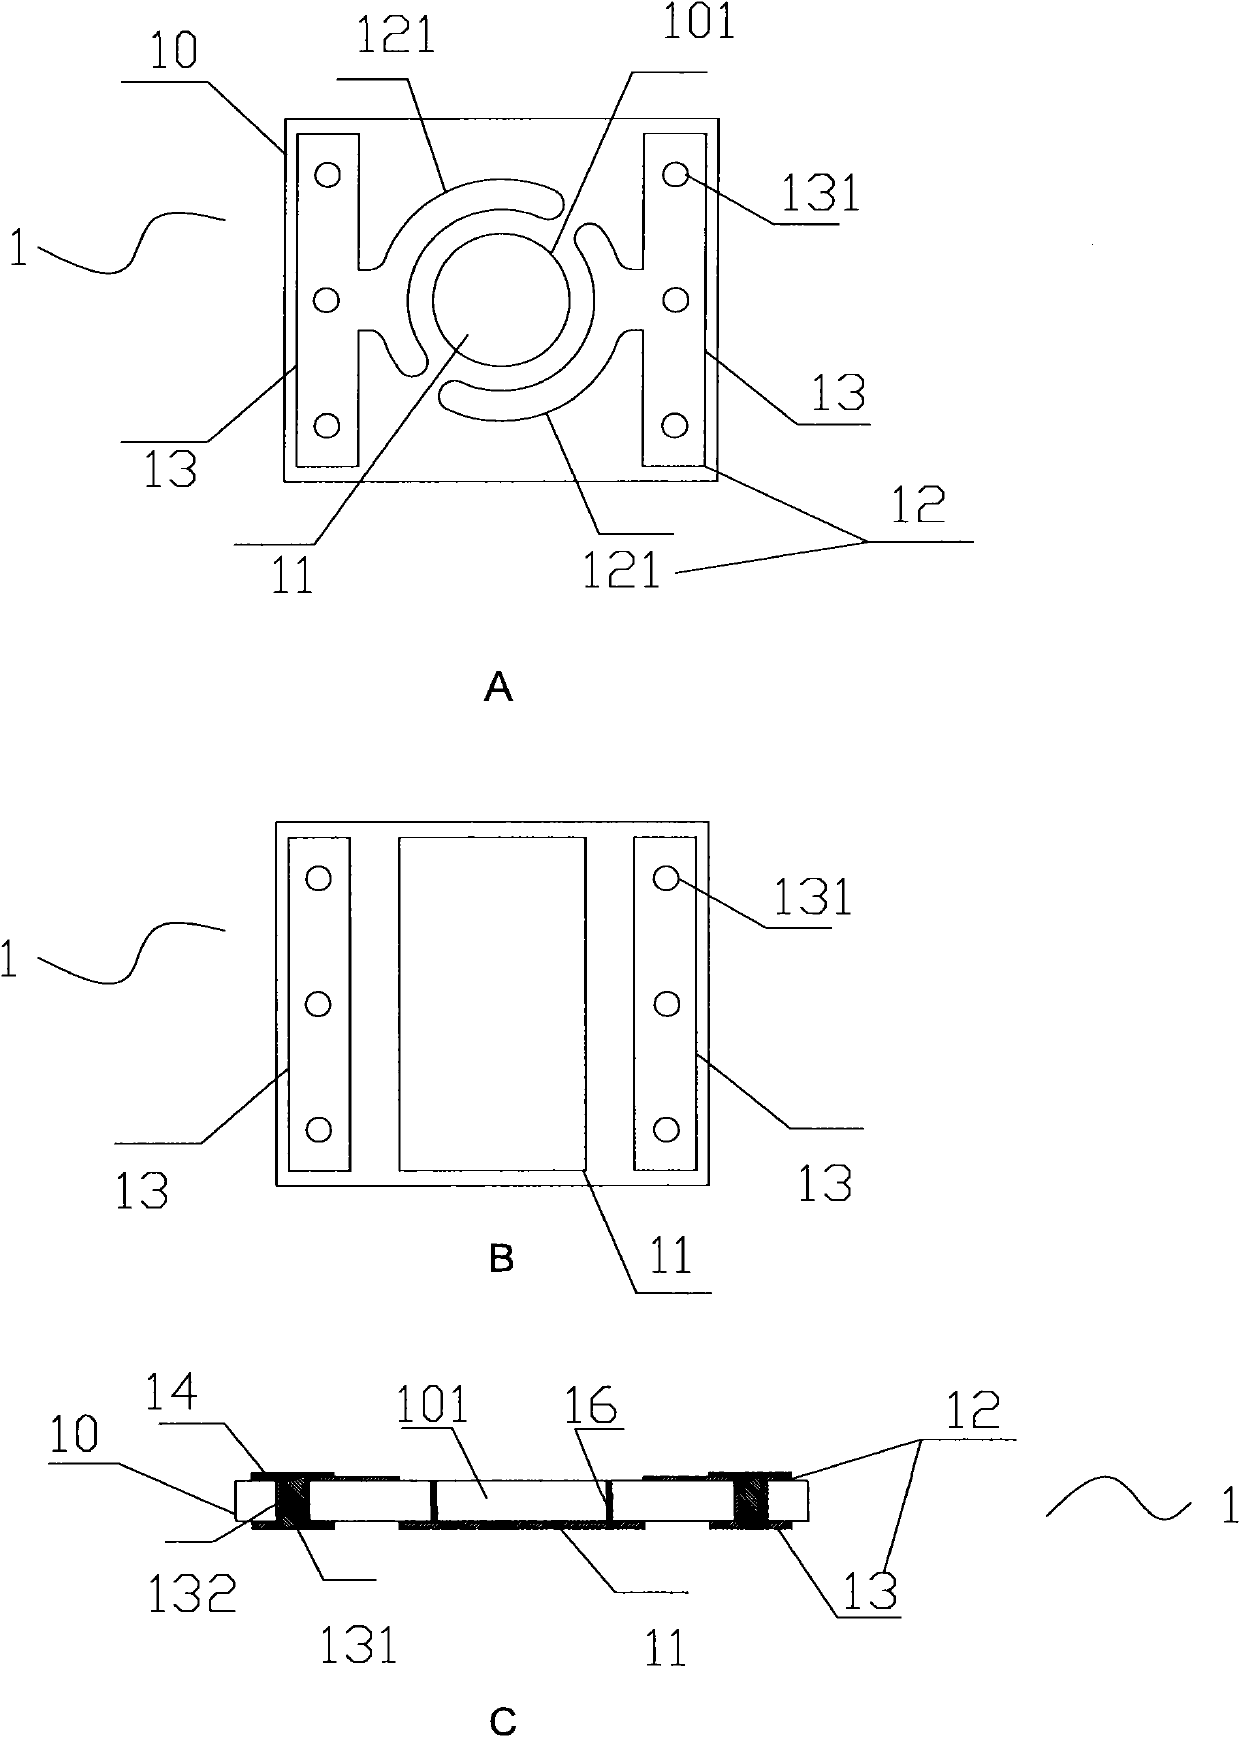 Surface mounted type power light-emitting diode (LED) bracket manufacturing method and product manufactured thereby